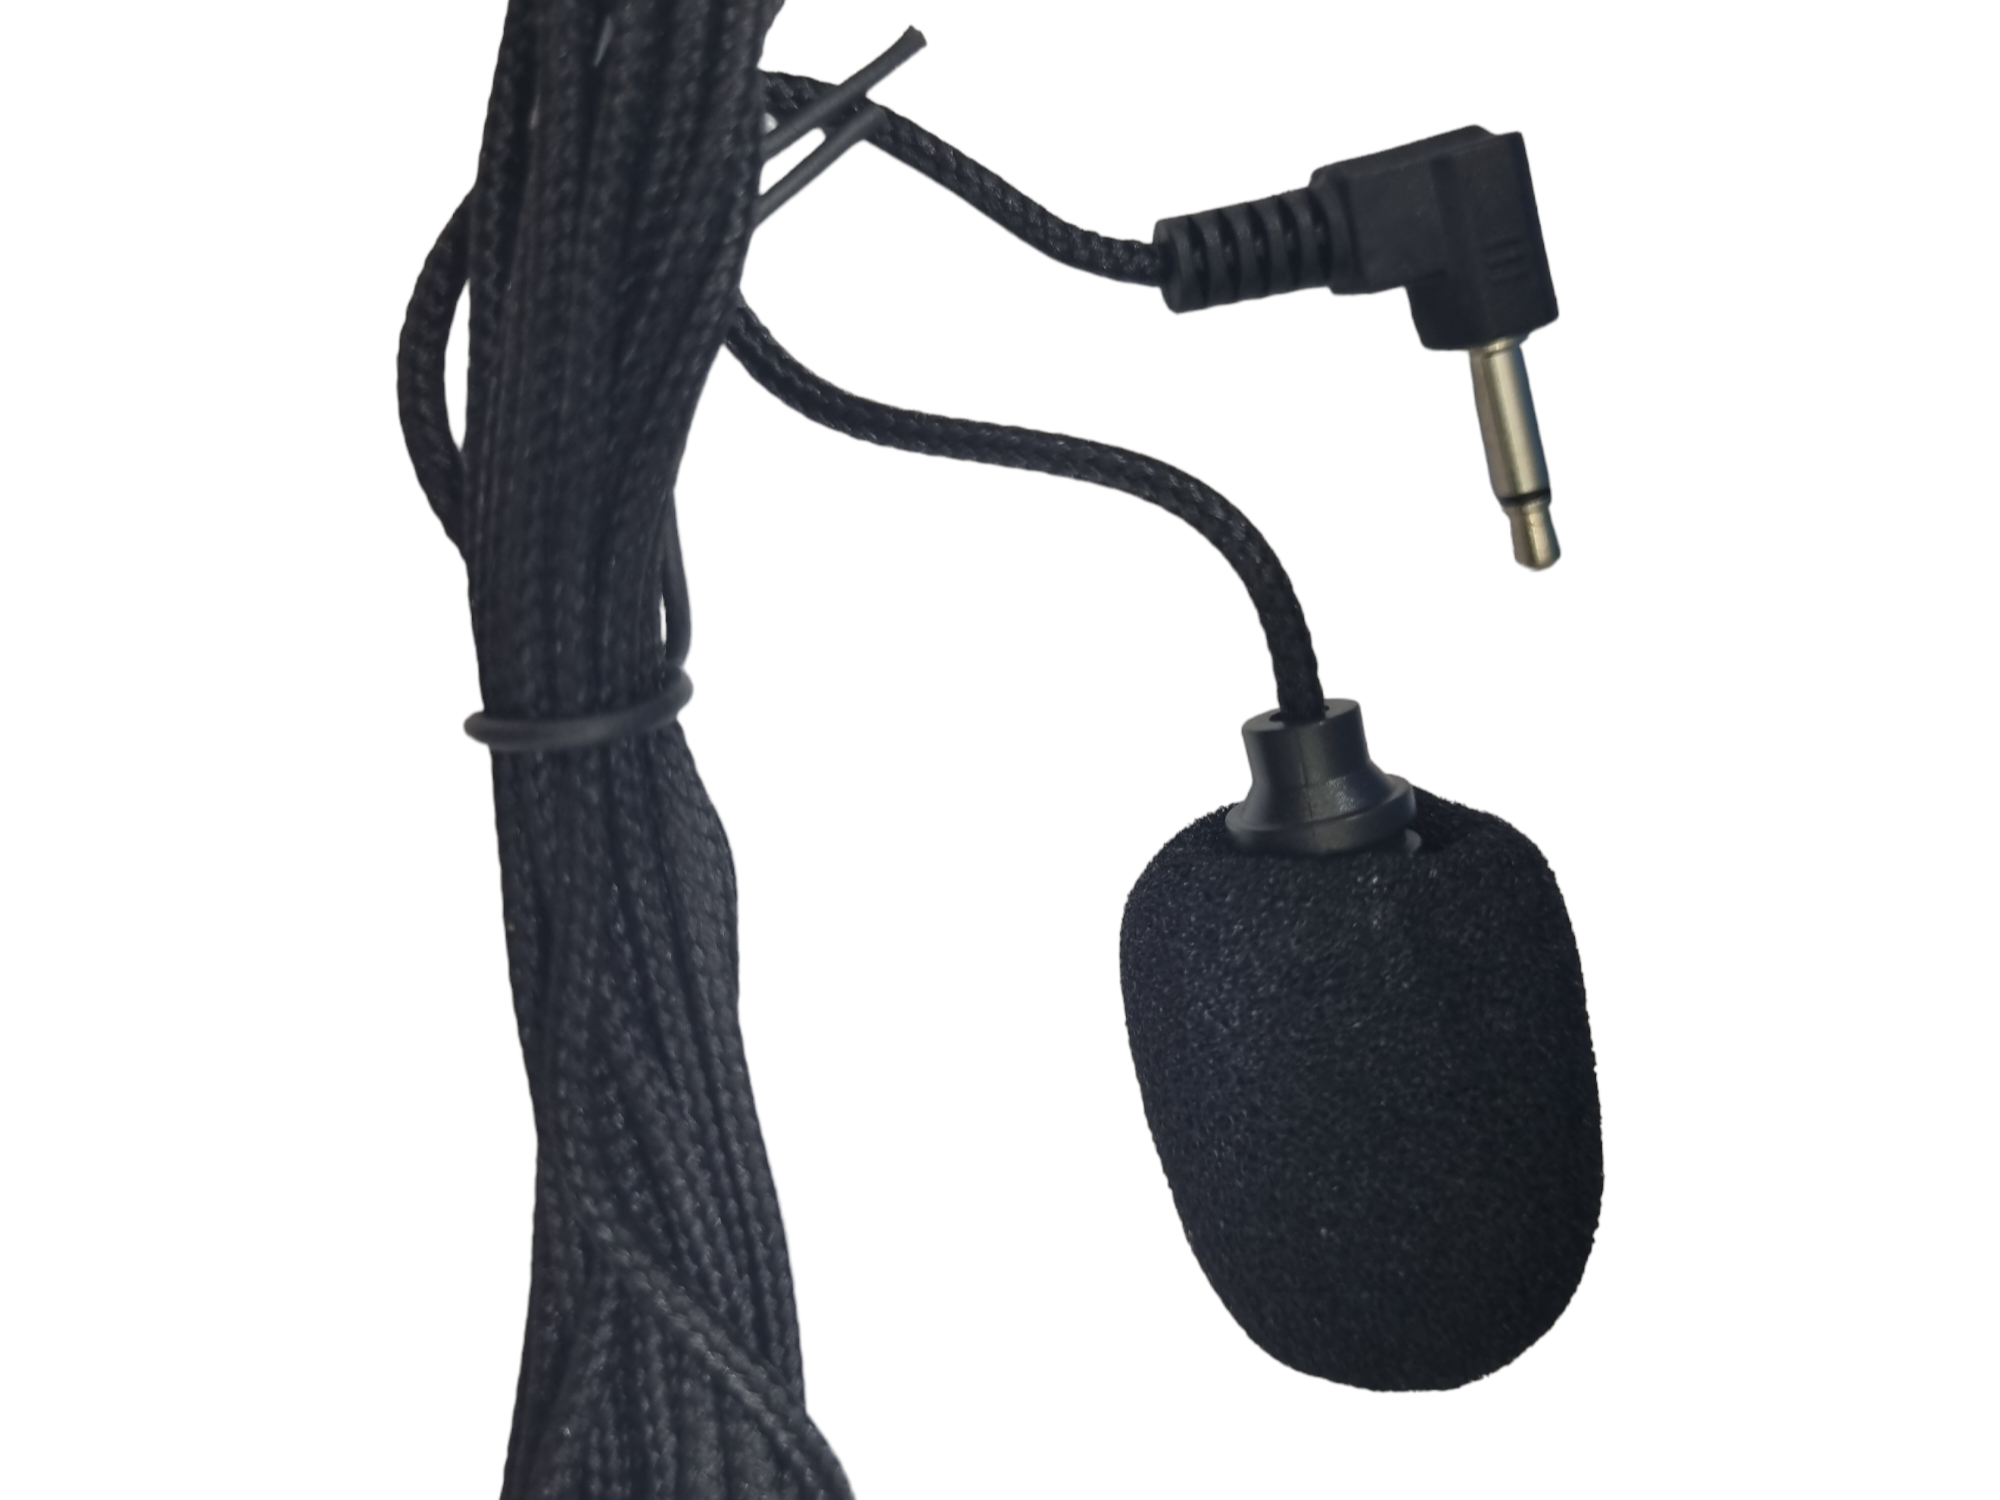 External car microphone suitable for Android monitor